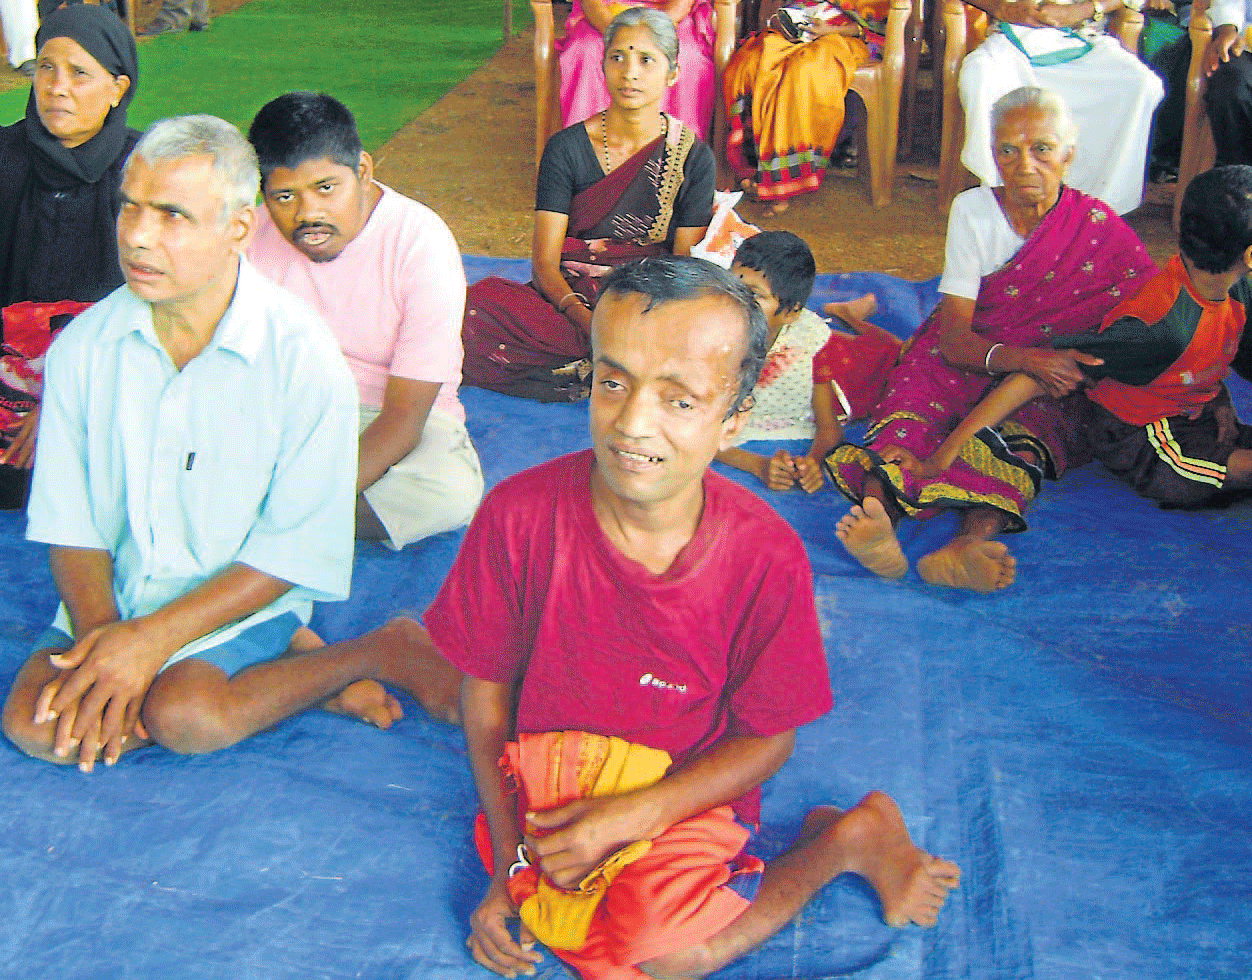 A DH file photo of endosulfan victims.